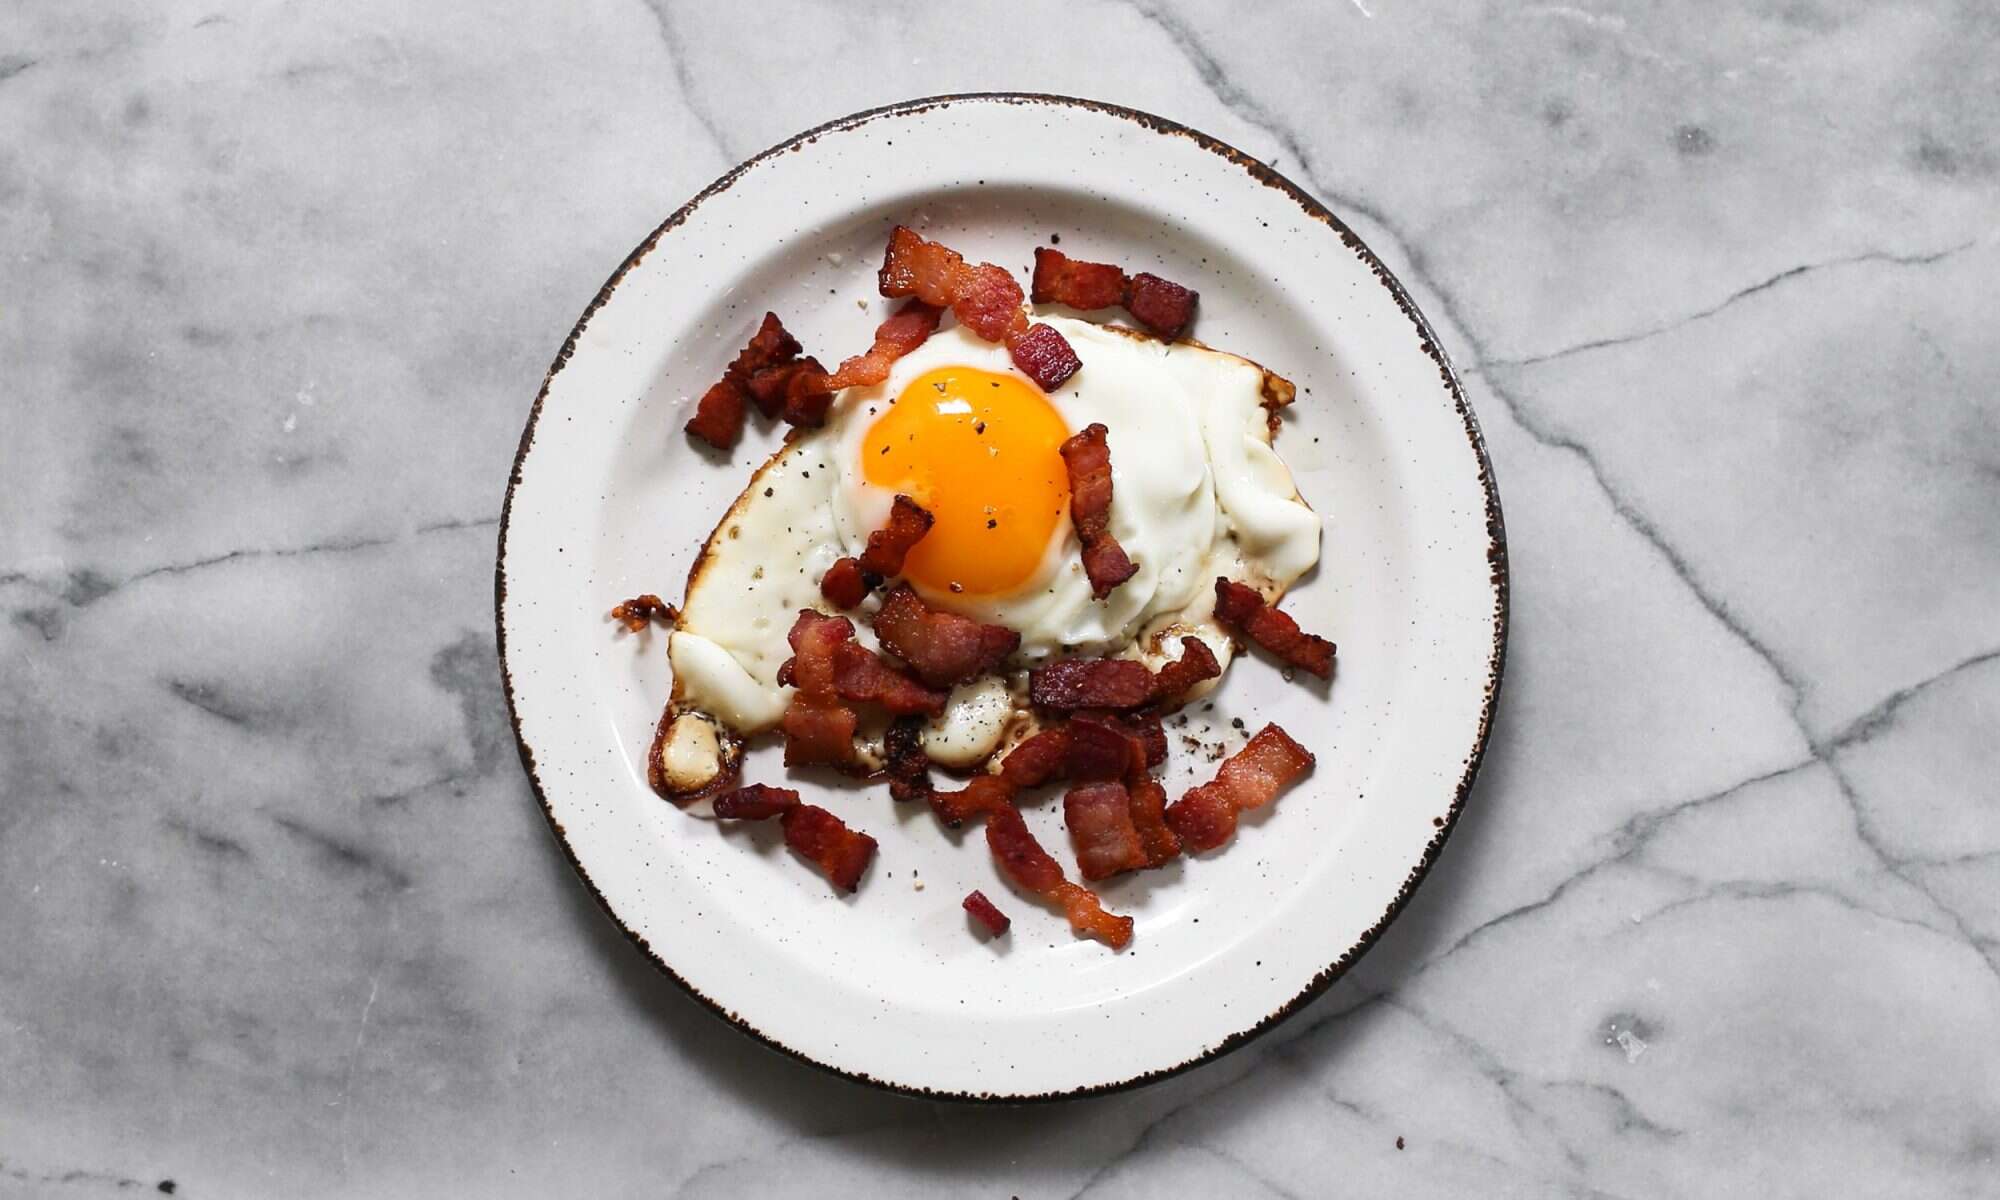 How to Fry an Egg {4 Ways!} - FeelGoodFoodie